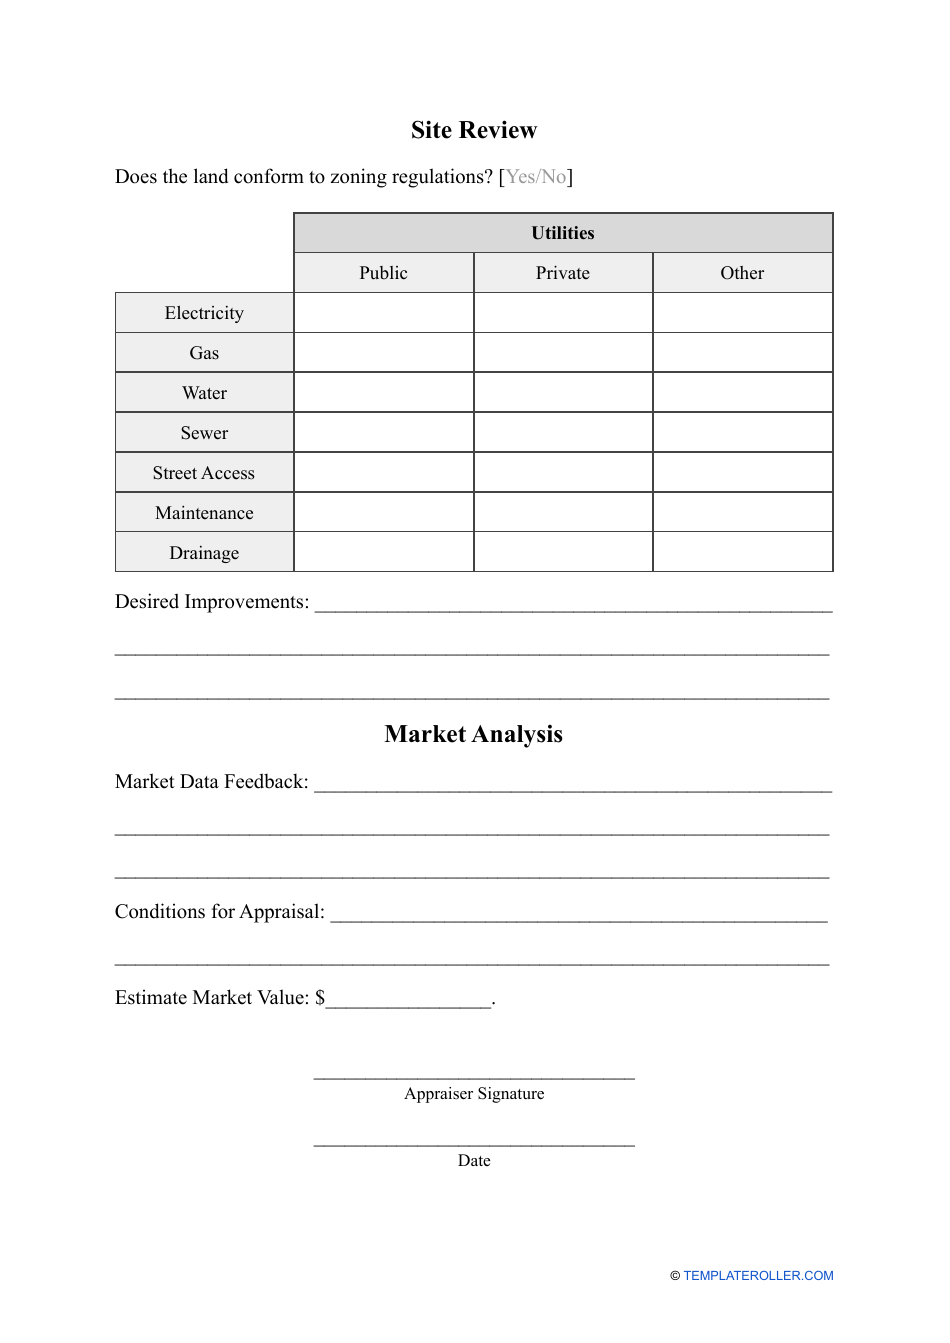 Land Appraisal Form Fill Out Sign Online And Download Pdf Templateroller 3025